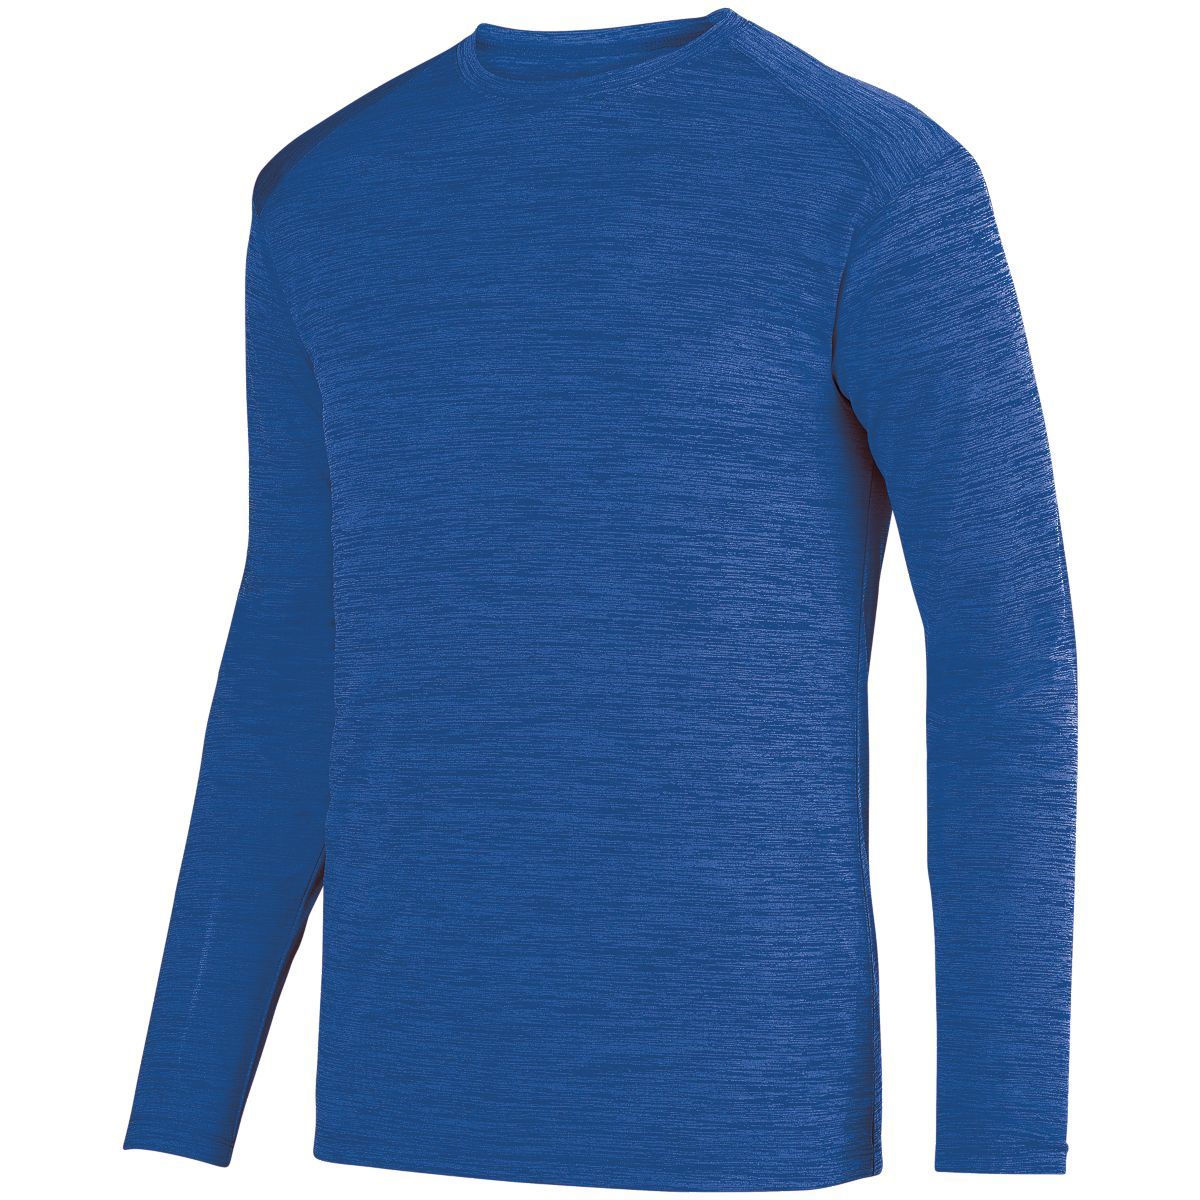 Augusta Sportswear Shadow Tonal Heather Long Sleeve Tee in Royal  -Part of the Adult, Adult-Tee-Shirt, T-Shirts, Augusta-Products, Shirts, Tonal-Fleece-Collection product lines at KanaleyCreations.com